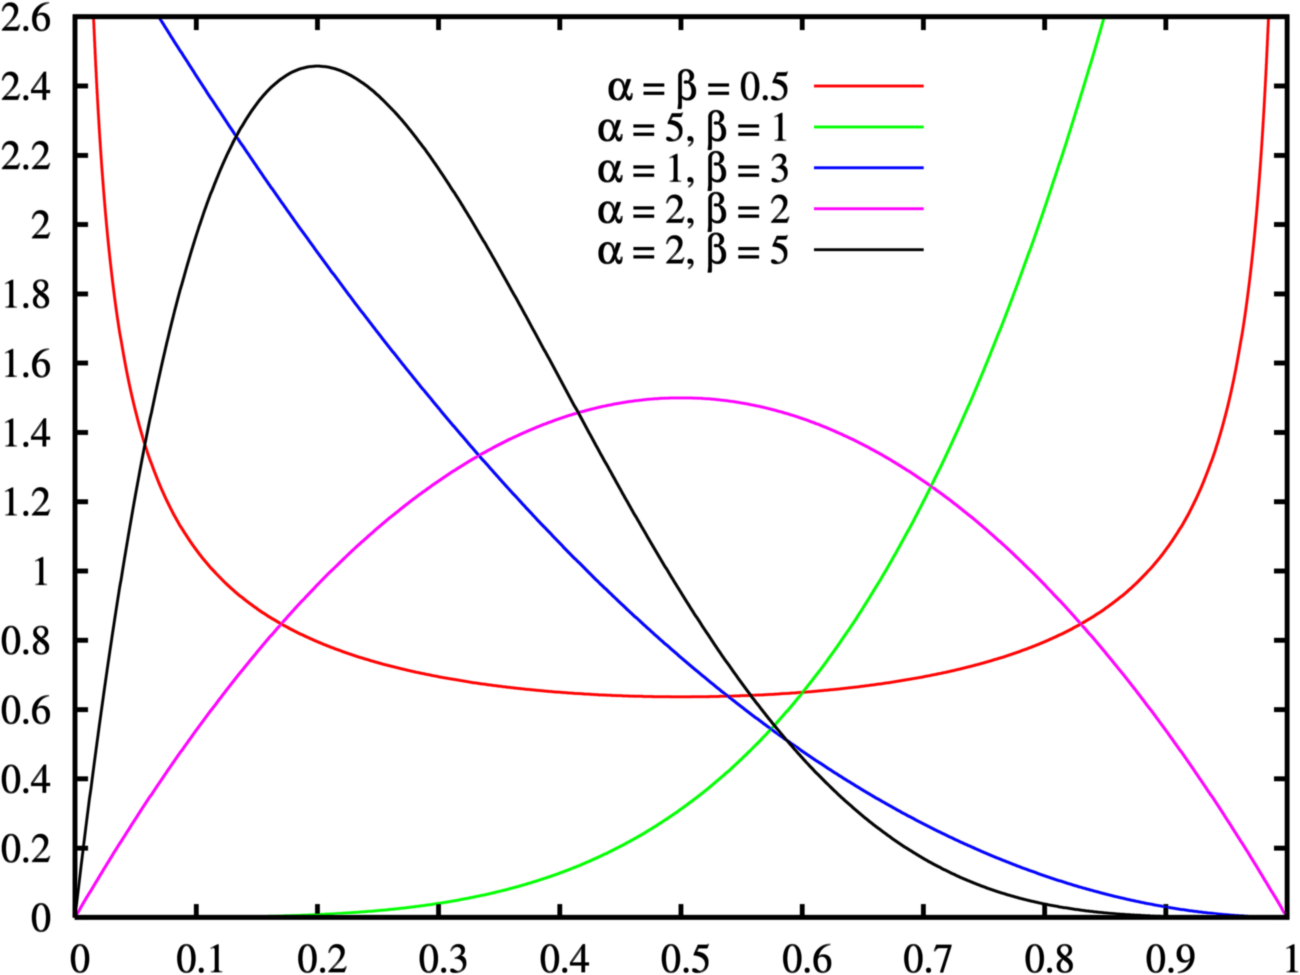 Probability density functions for beta distribution with different parameters.